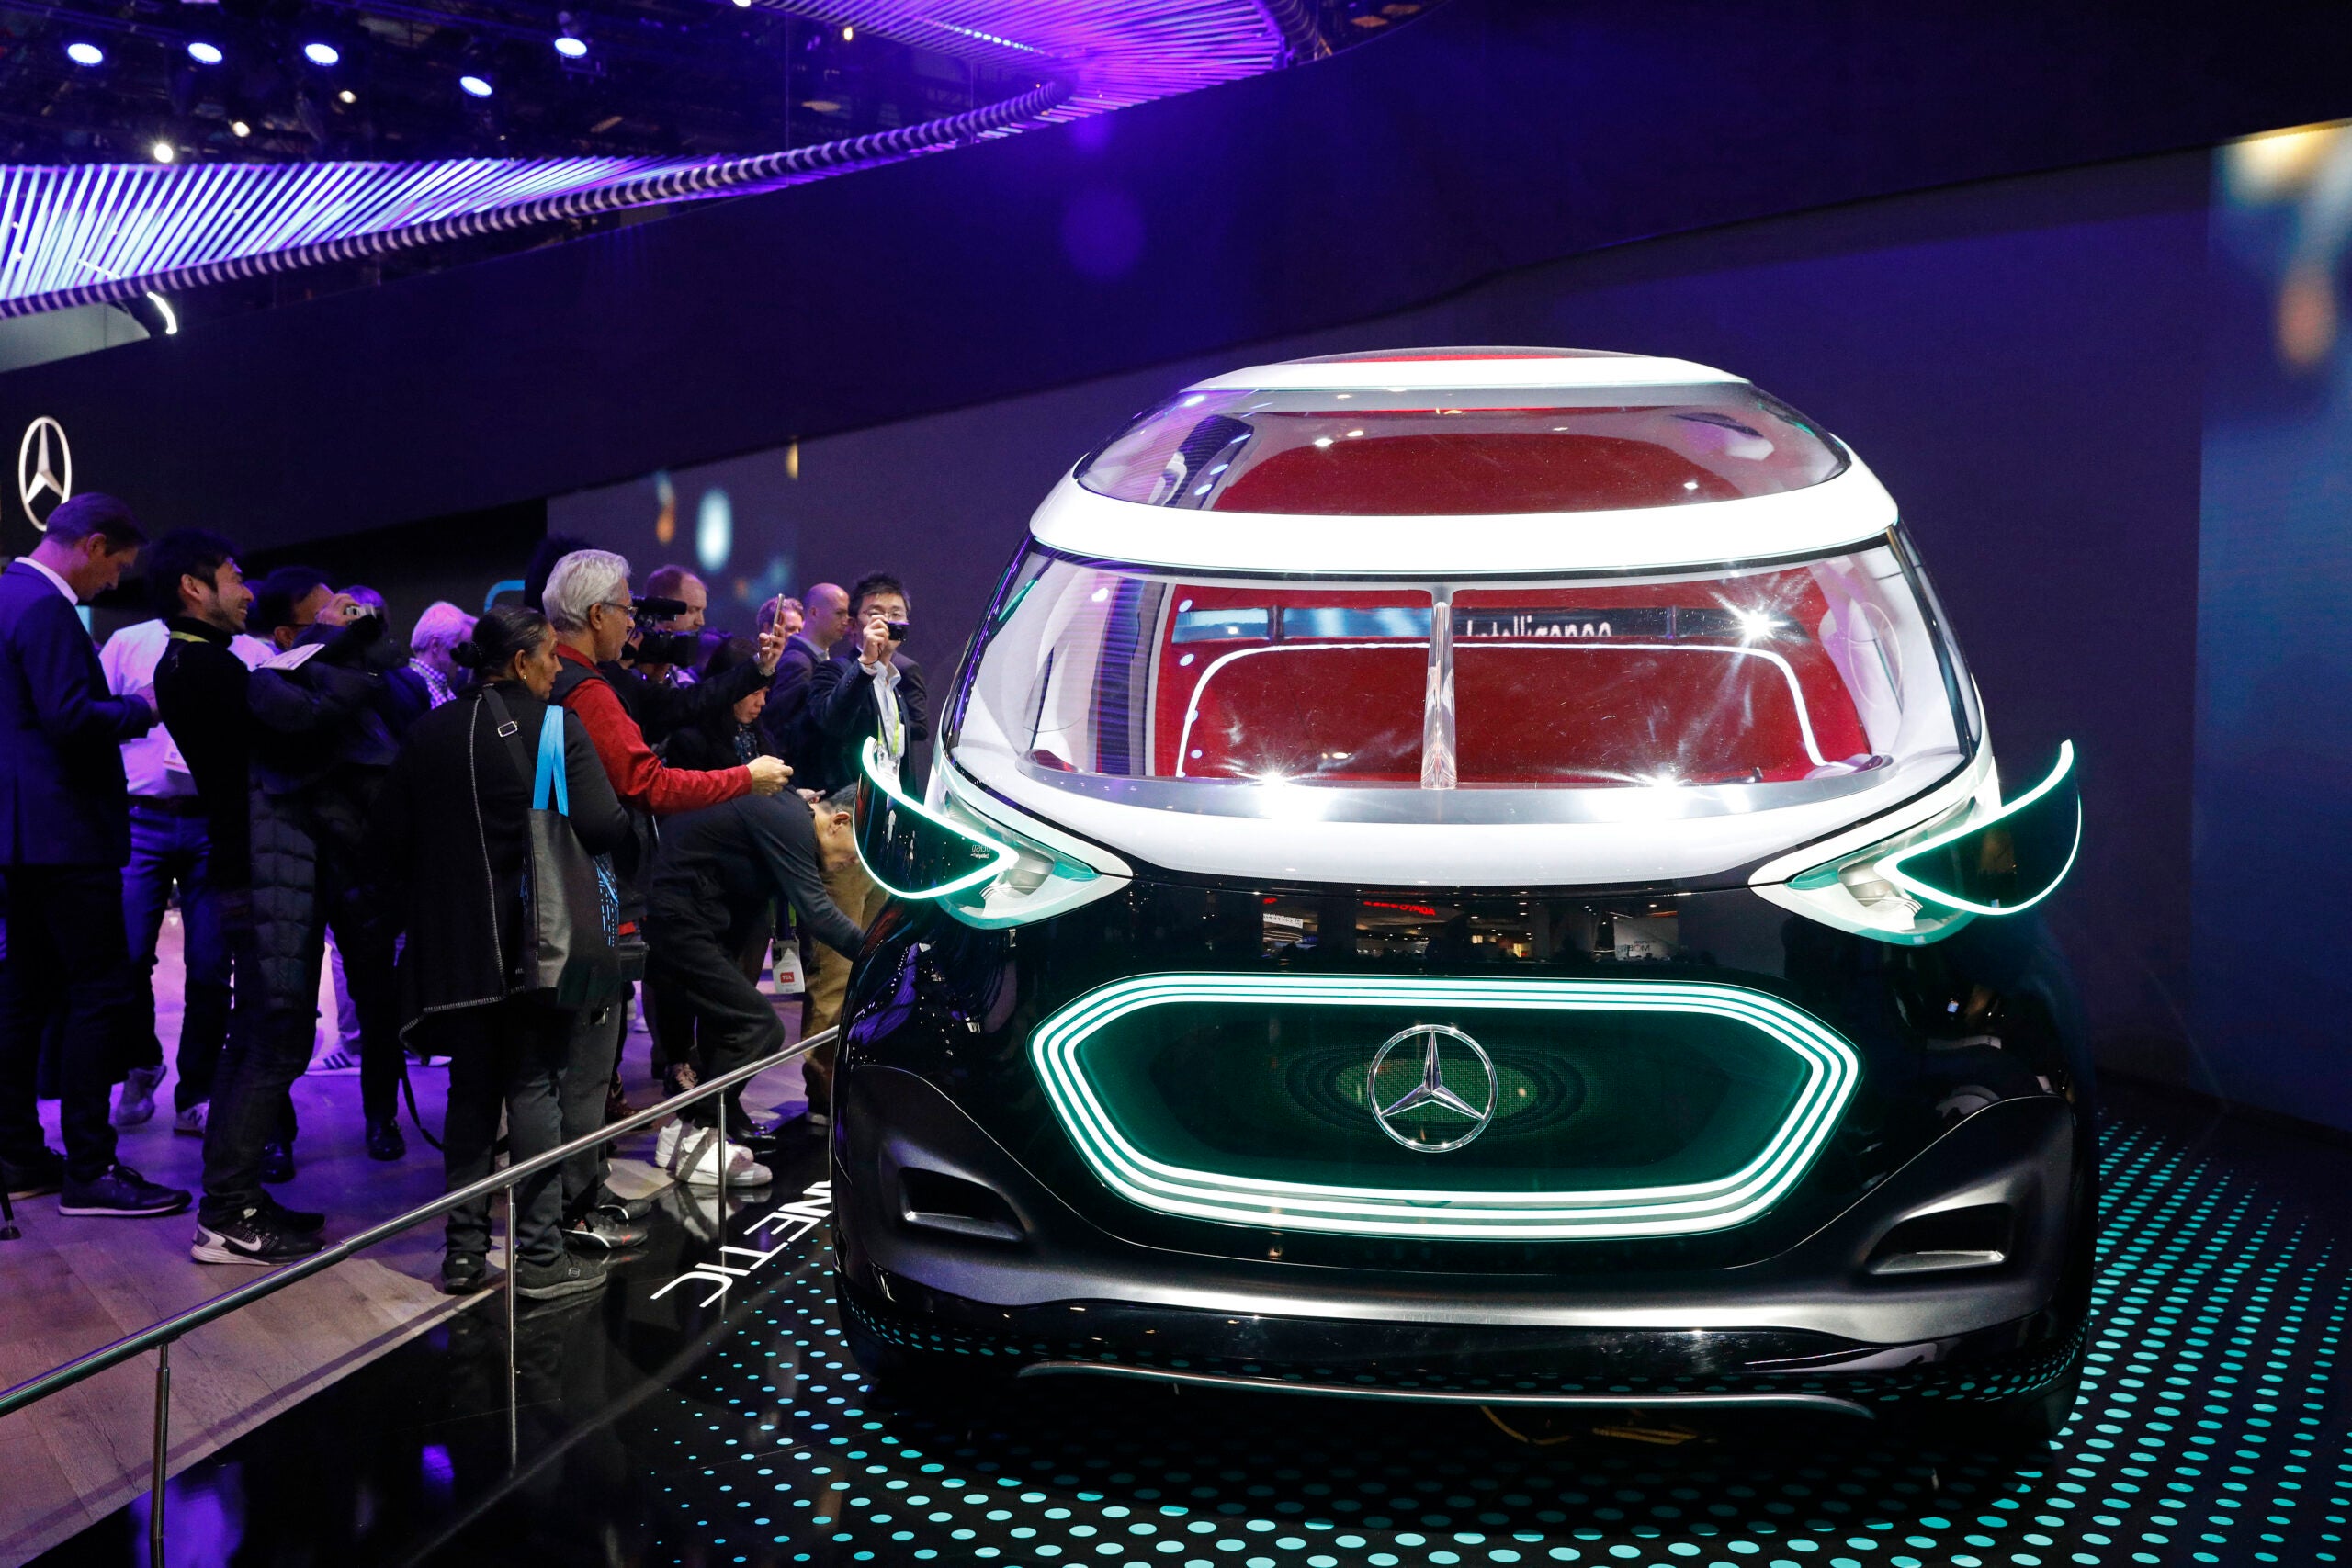 Edmunds highlights top car tech trends from CES